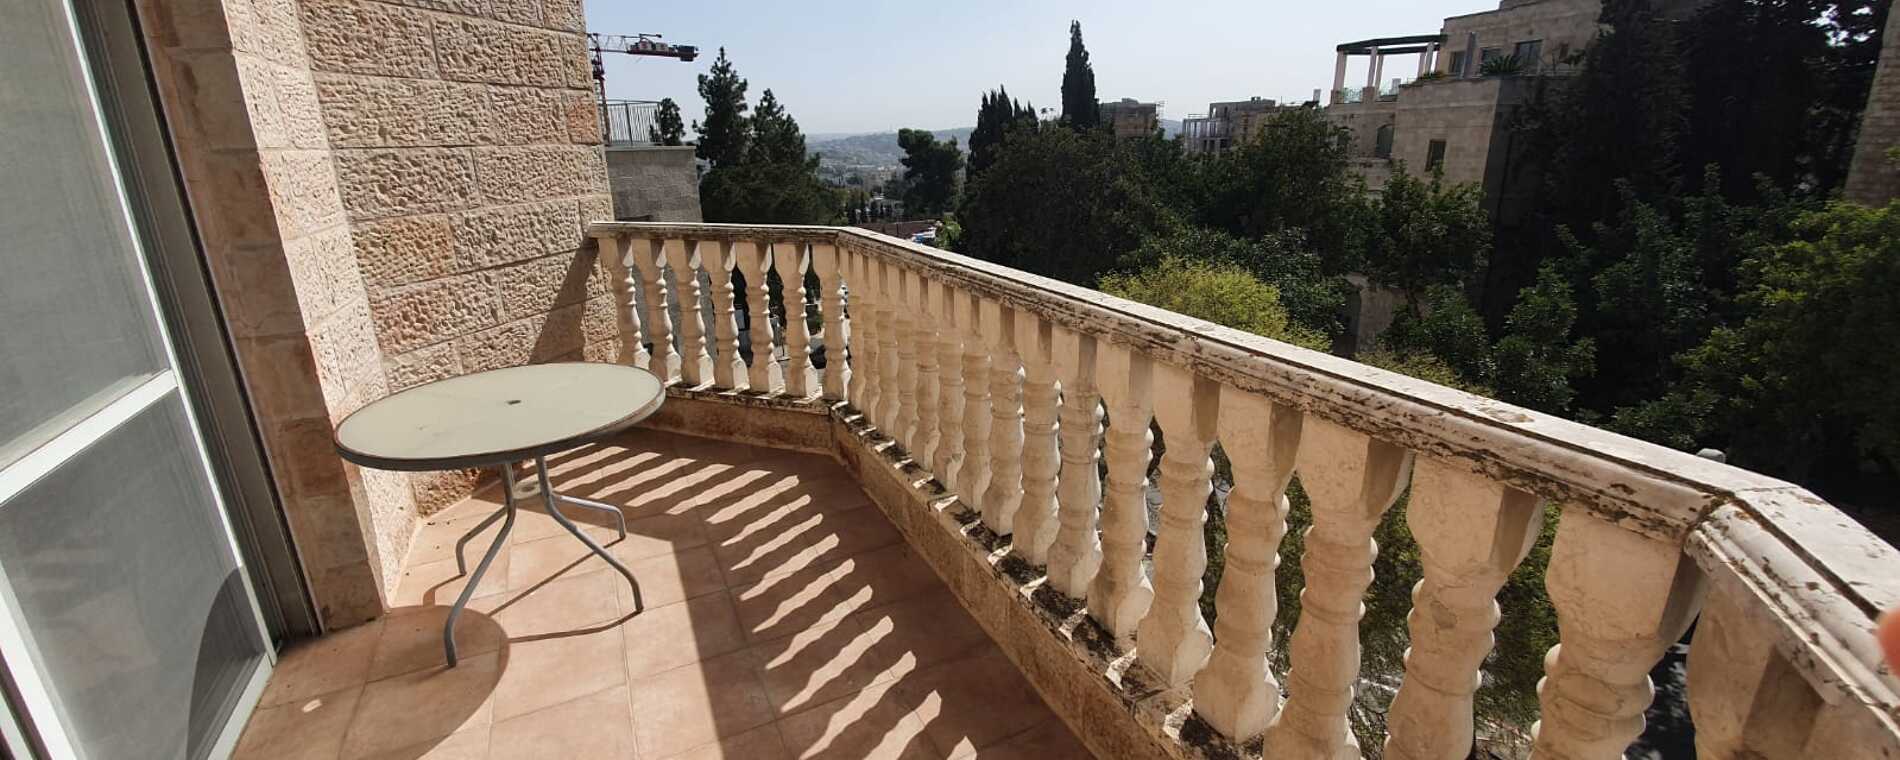 assets/images/properties/Marcus Balcony.jpg